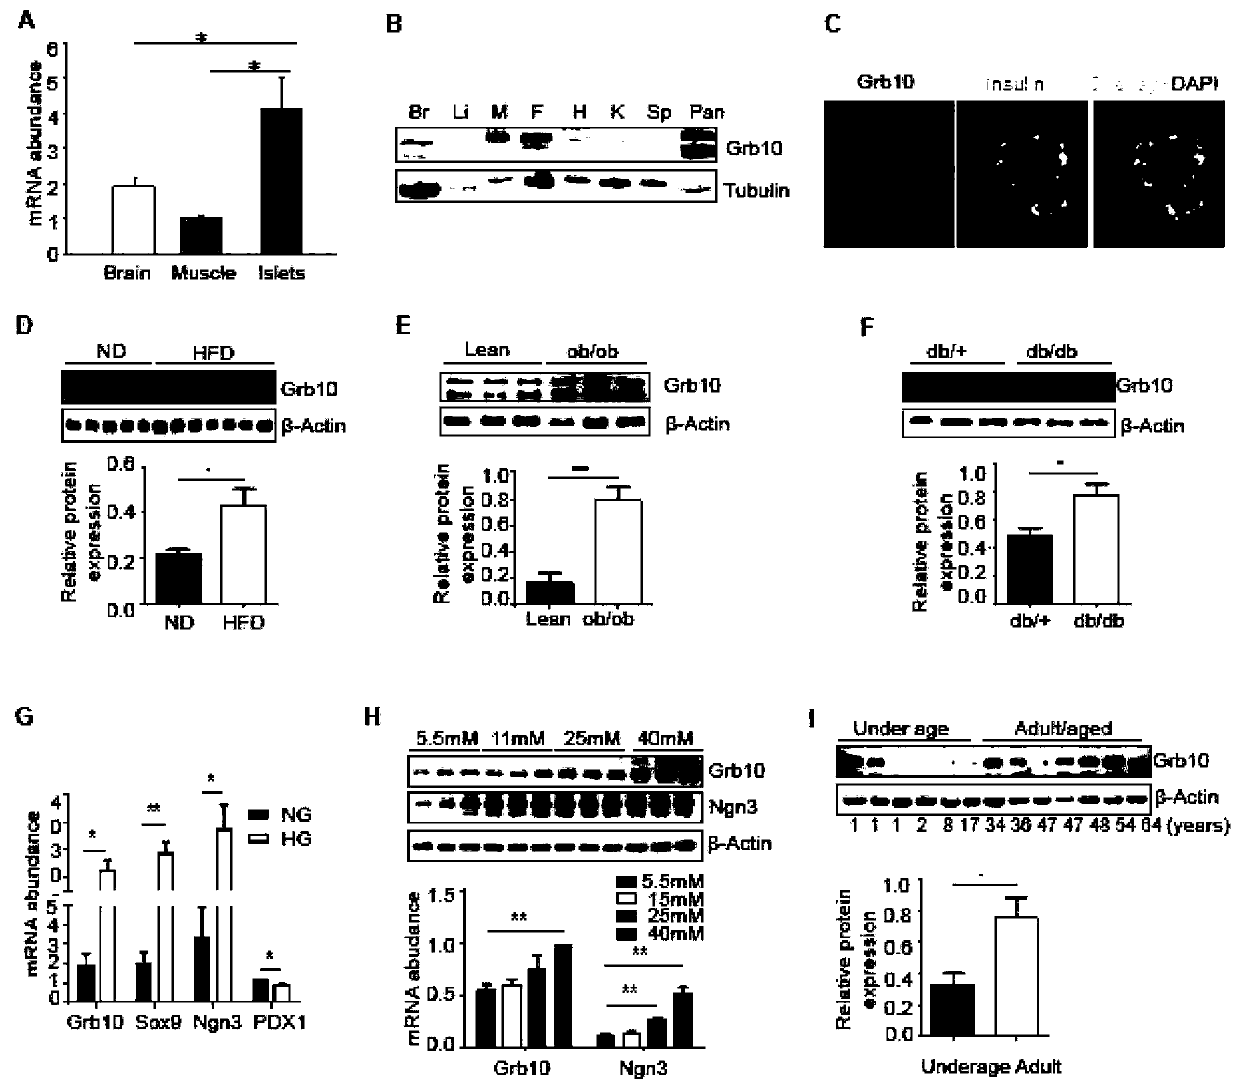 Application of Grb10 as key negative regulation factor of beta cell dysfunction